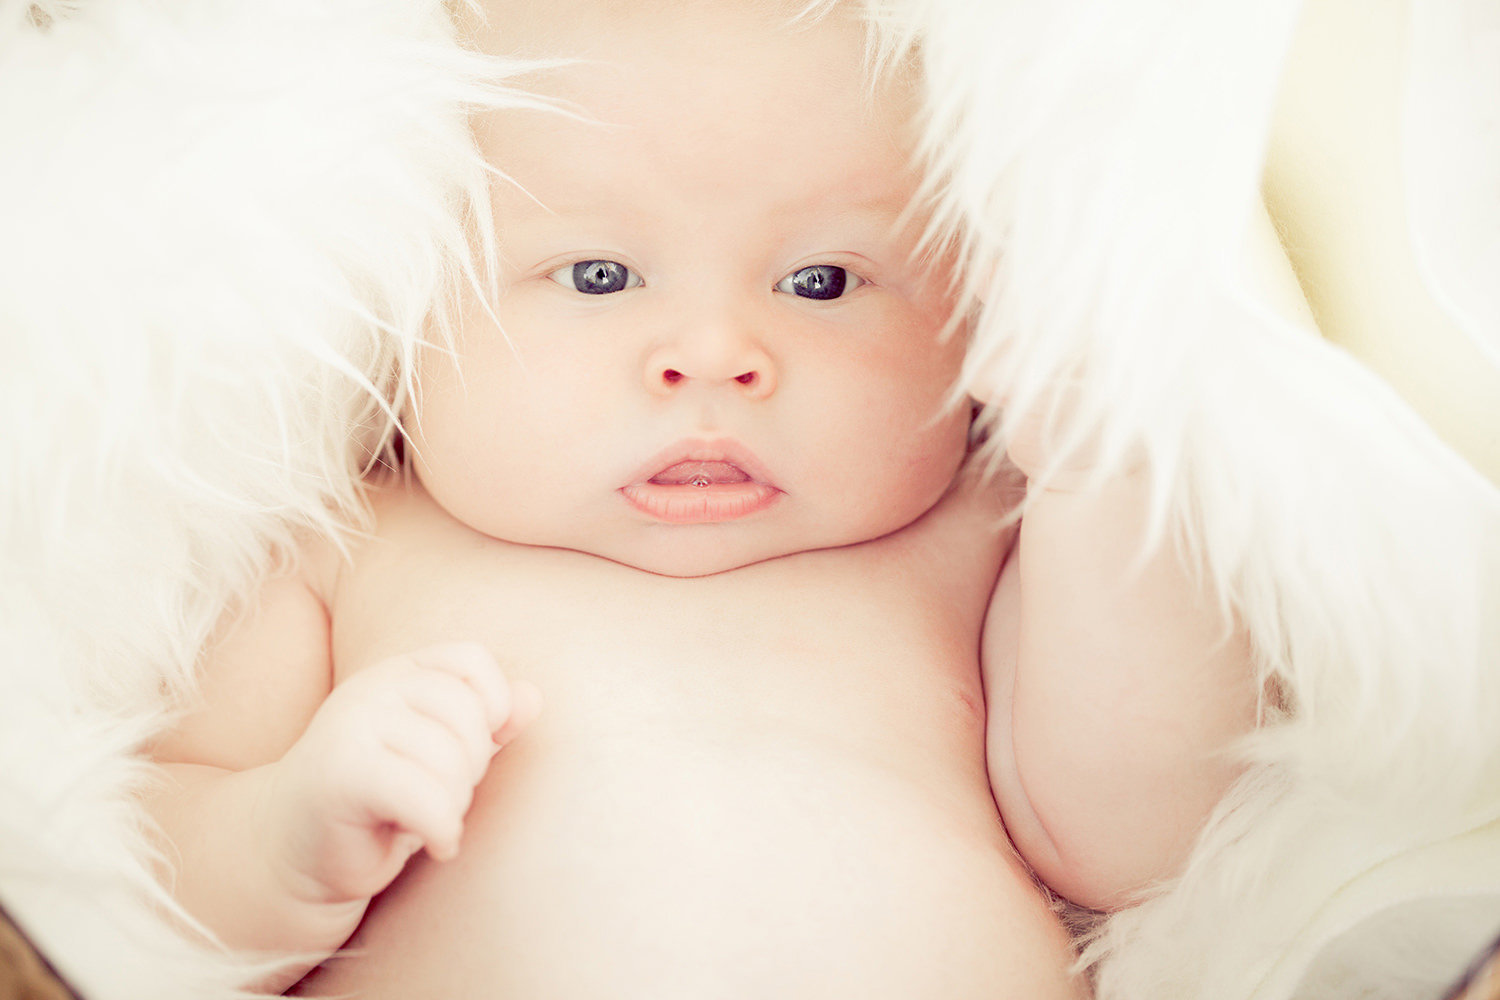 san diego newborn photography | newborn with silly face and big blue eyes